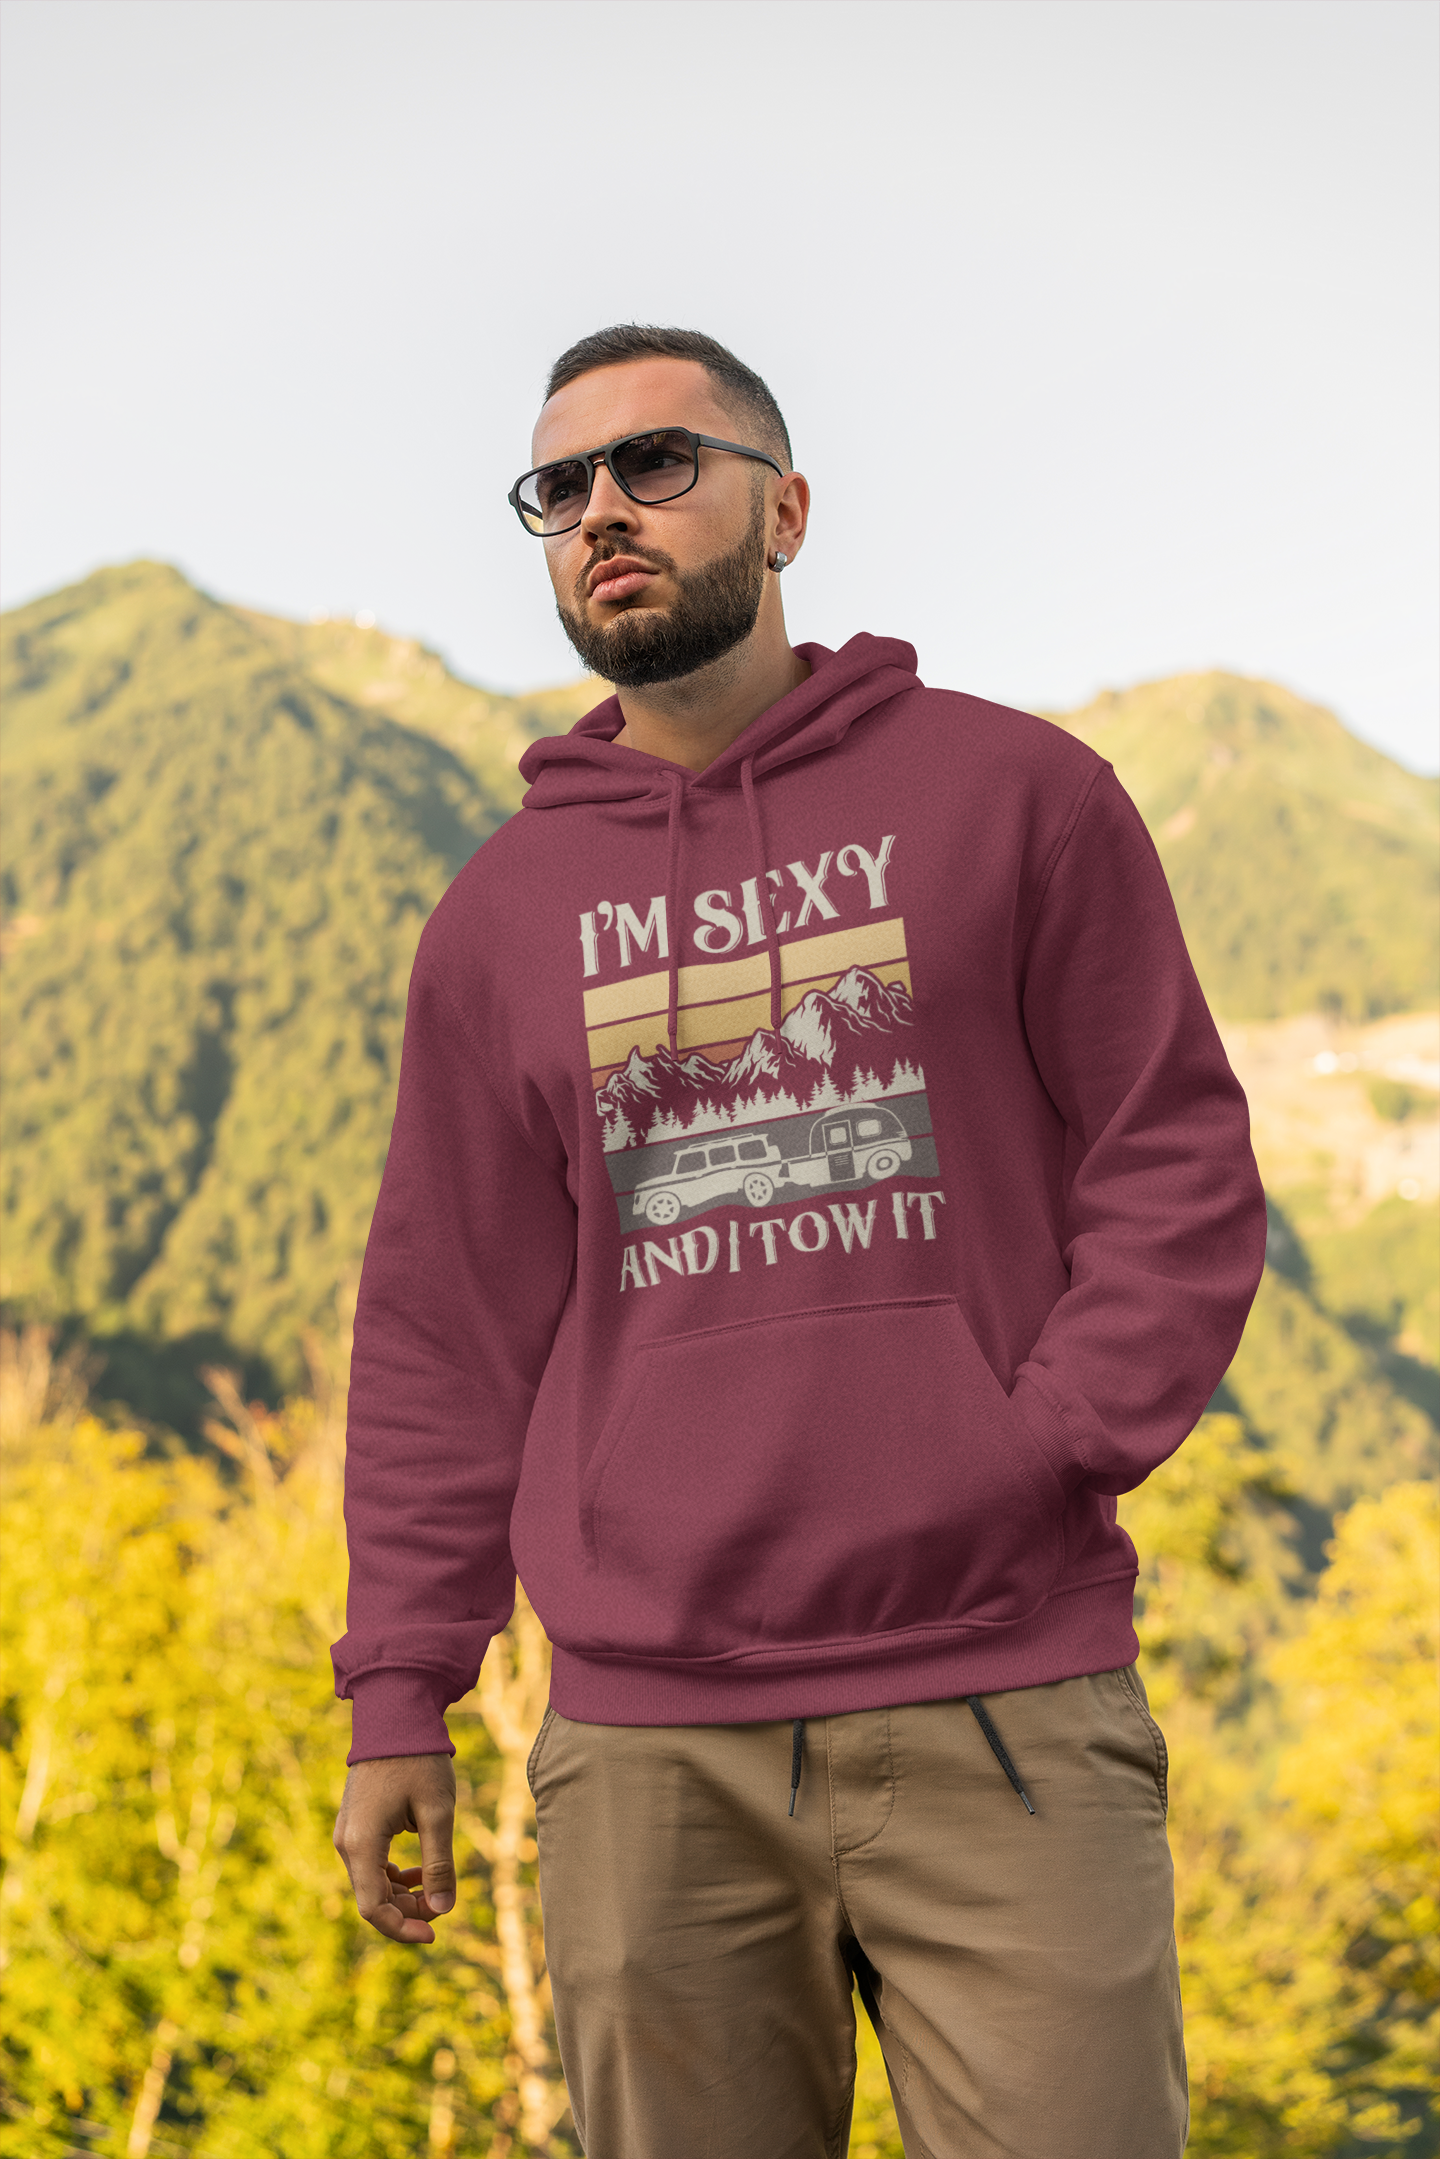 I'm Sexy and I tow; it Pull-over hoodie sweatshirt